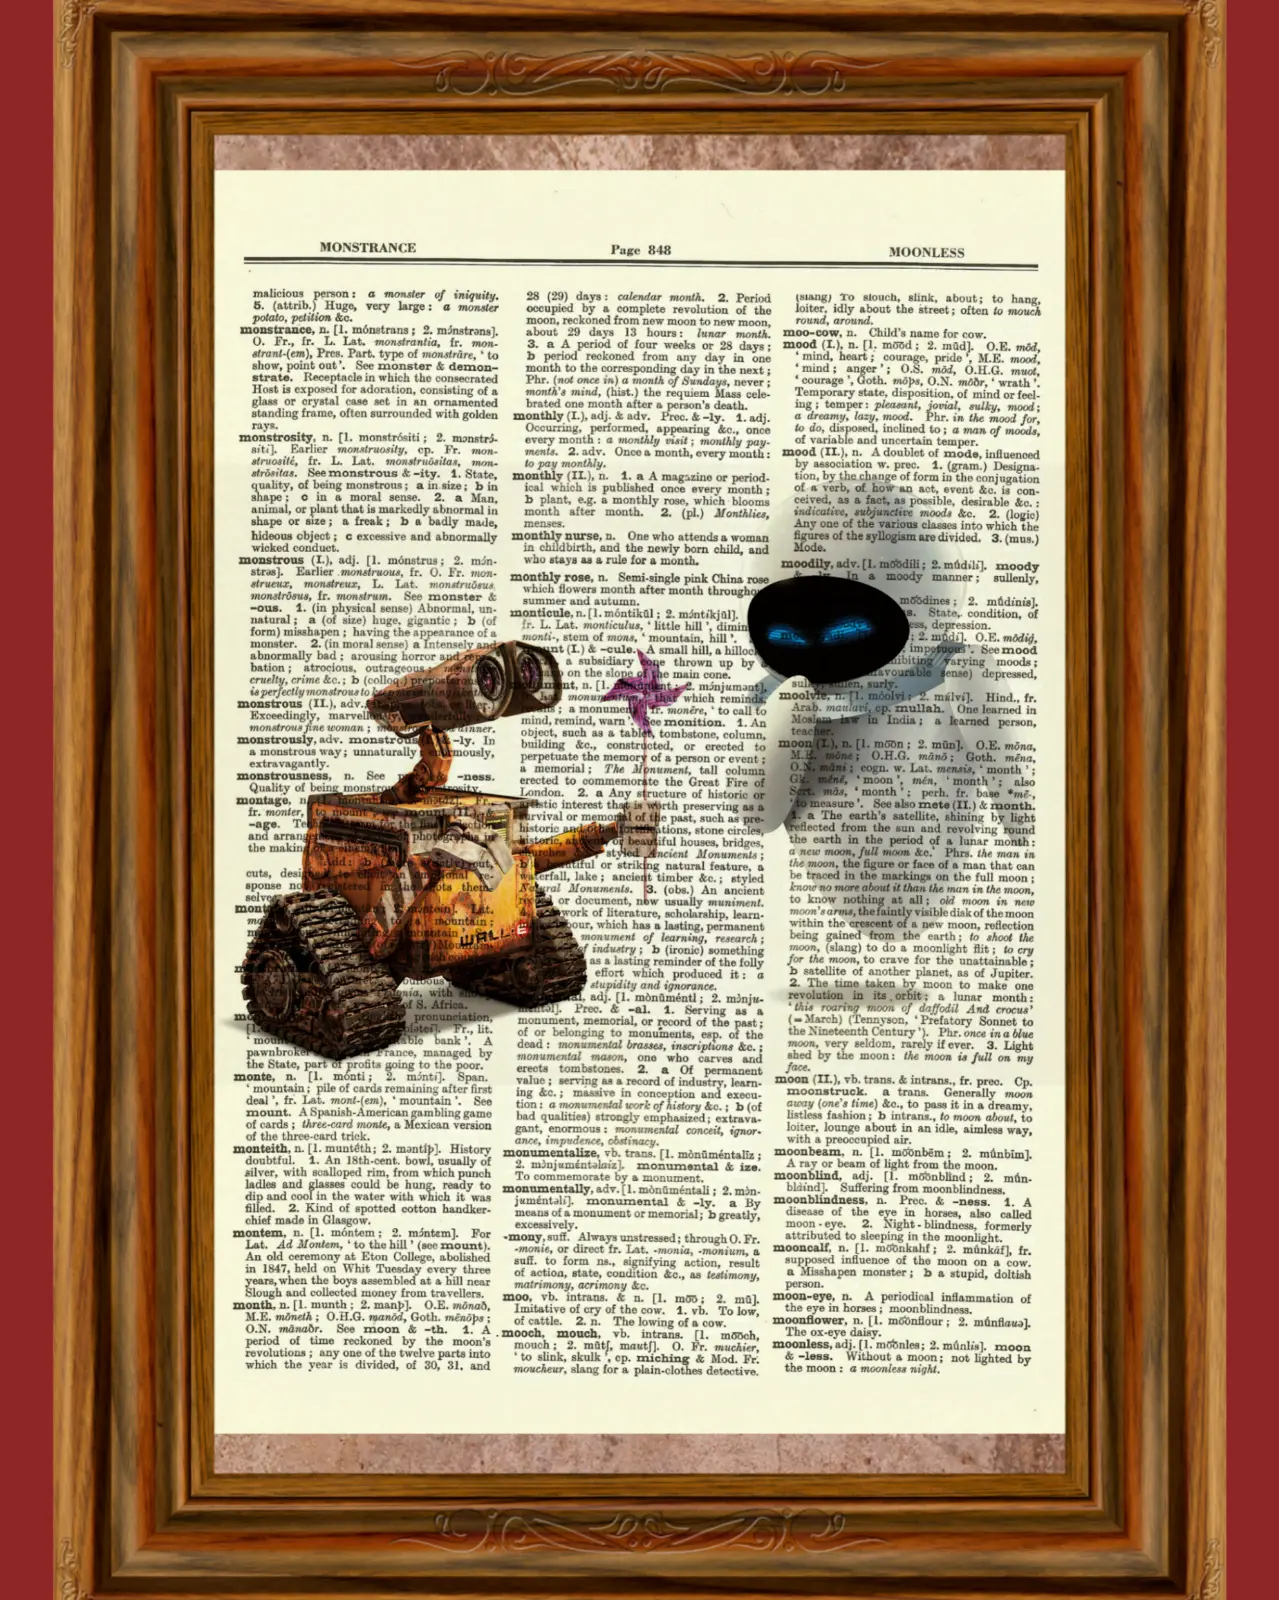 Wall-e Dictionary Art Print Picture Poster Pixar Movie Gift Robot Walle Disney